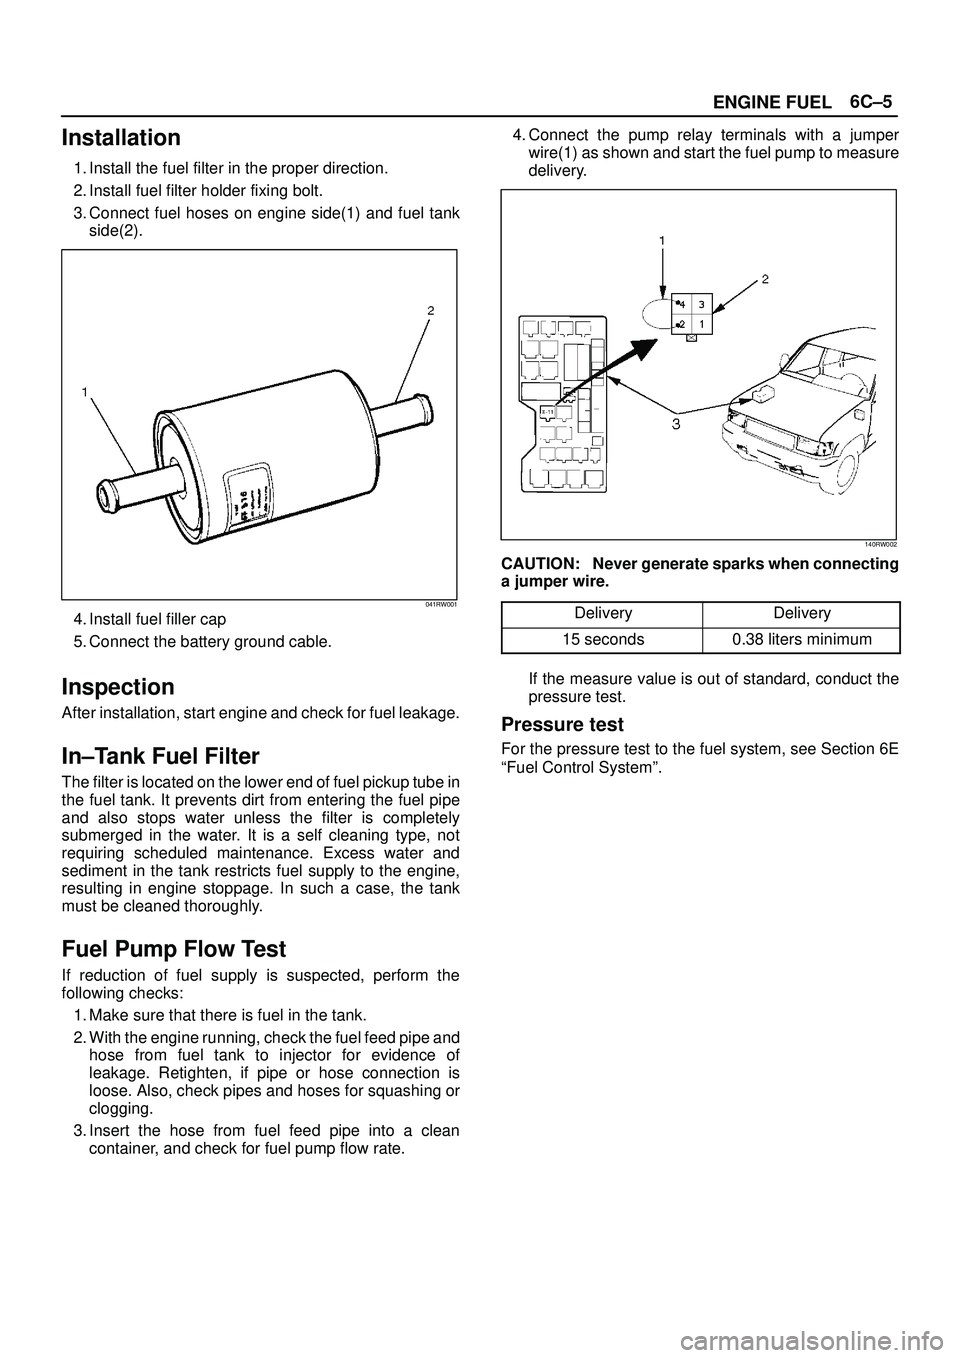 ISUZU TROOPER 1998  Service Repair Manual 6C±5
ENGINE FUEL
Installation
1. Install the fuel filter in the proper direction.
2. Install fuel filter holder fixing bolt.
3. Connect fuel hoses on engine side(1) and fuel tank
side(2).
041RW001
4.